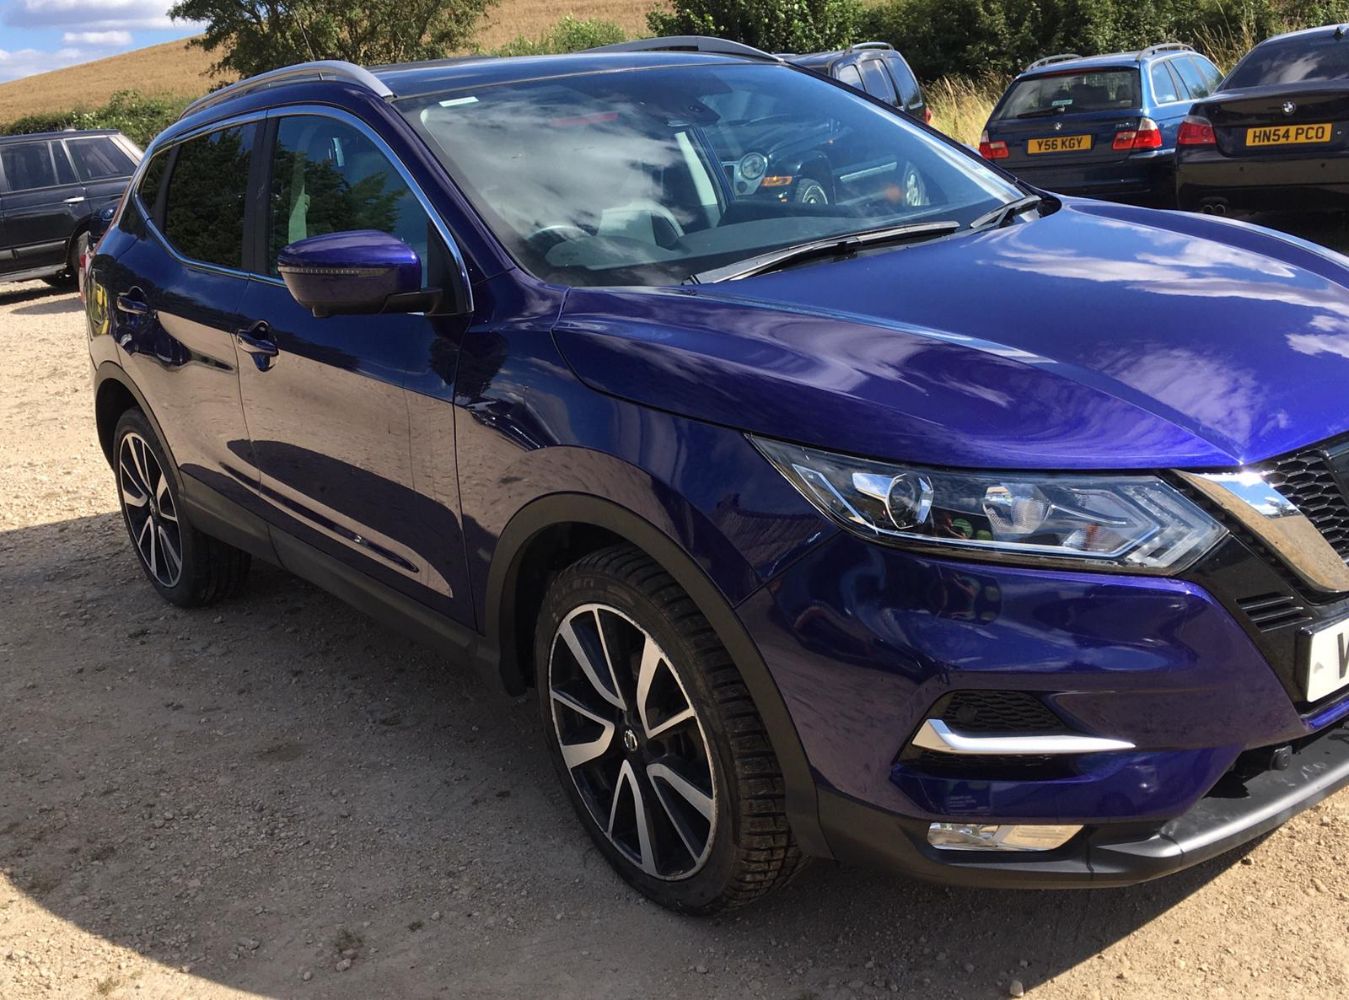 2017 NISSAN QASHQAI TEKNA DIG-T 1.6 PETROL, BRAND NEW BATESON TRAILER, VAUXHALL CORSA, ASTRA, MOWERS, FORKLIFT, BACKHOE, ENDS FROM 7PM THURSDAY!